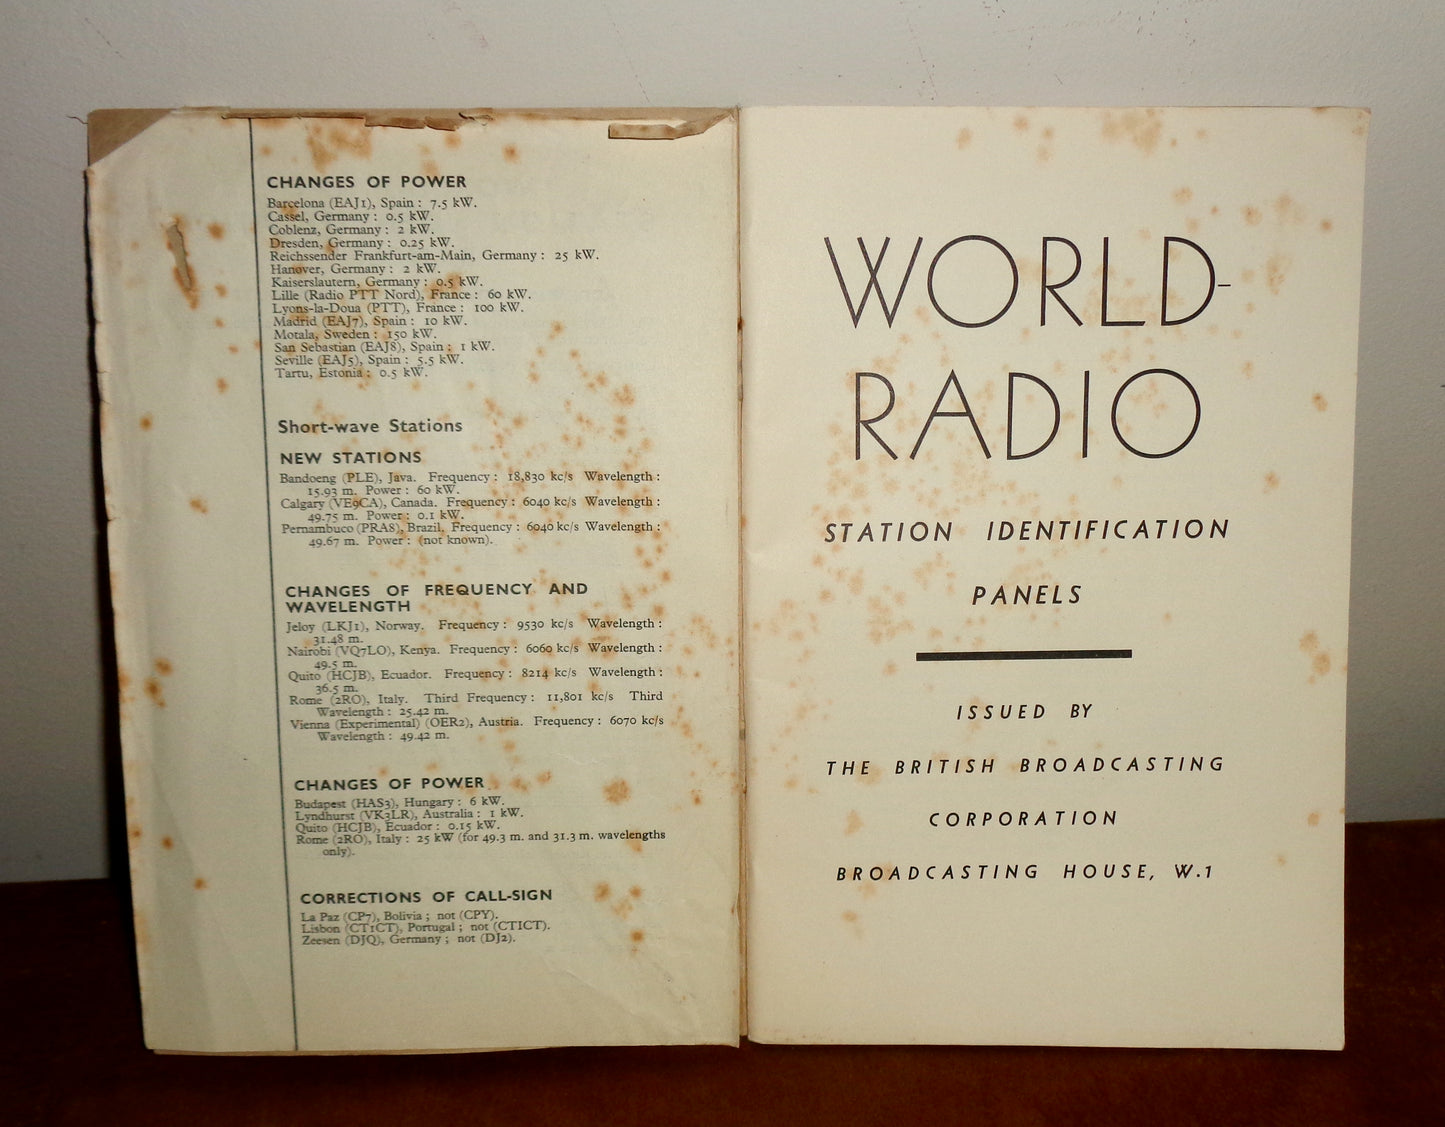 June 1935 World Radio Station Identification Panels Issued By The BBC